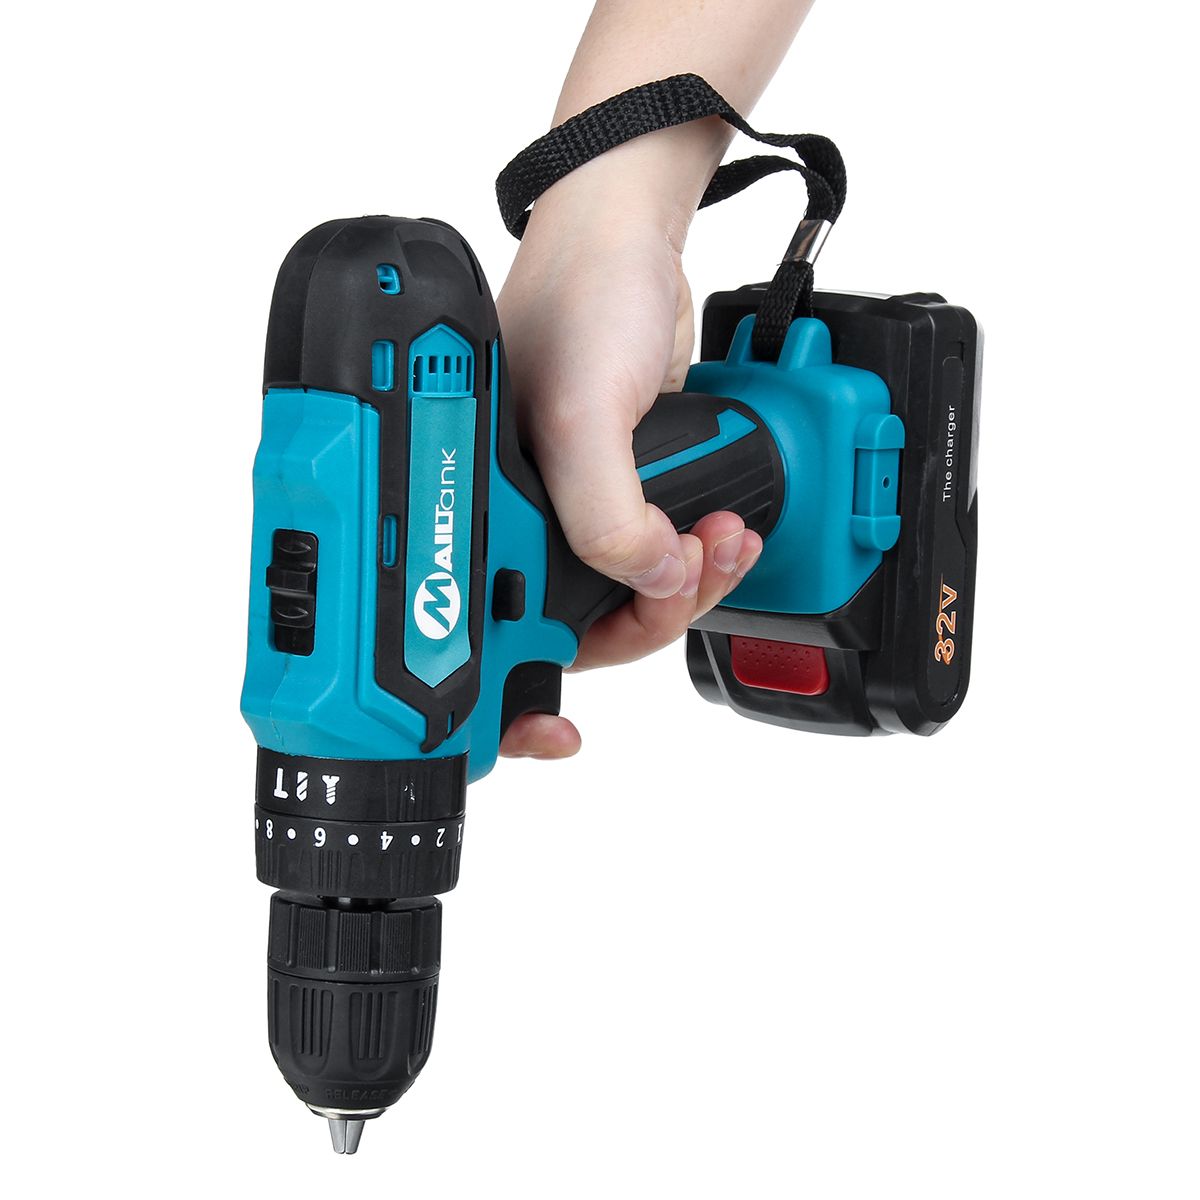 32V-2-Speed-6000mah-Cordless-Drill-3IN1-Electric-Screwdriver-Hammer-Impact-Hand-Drill-1655598